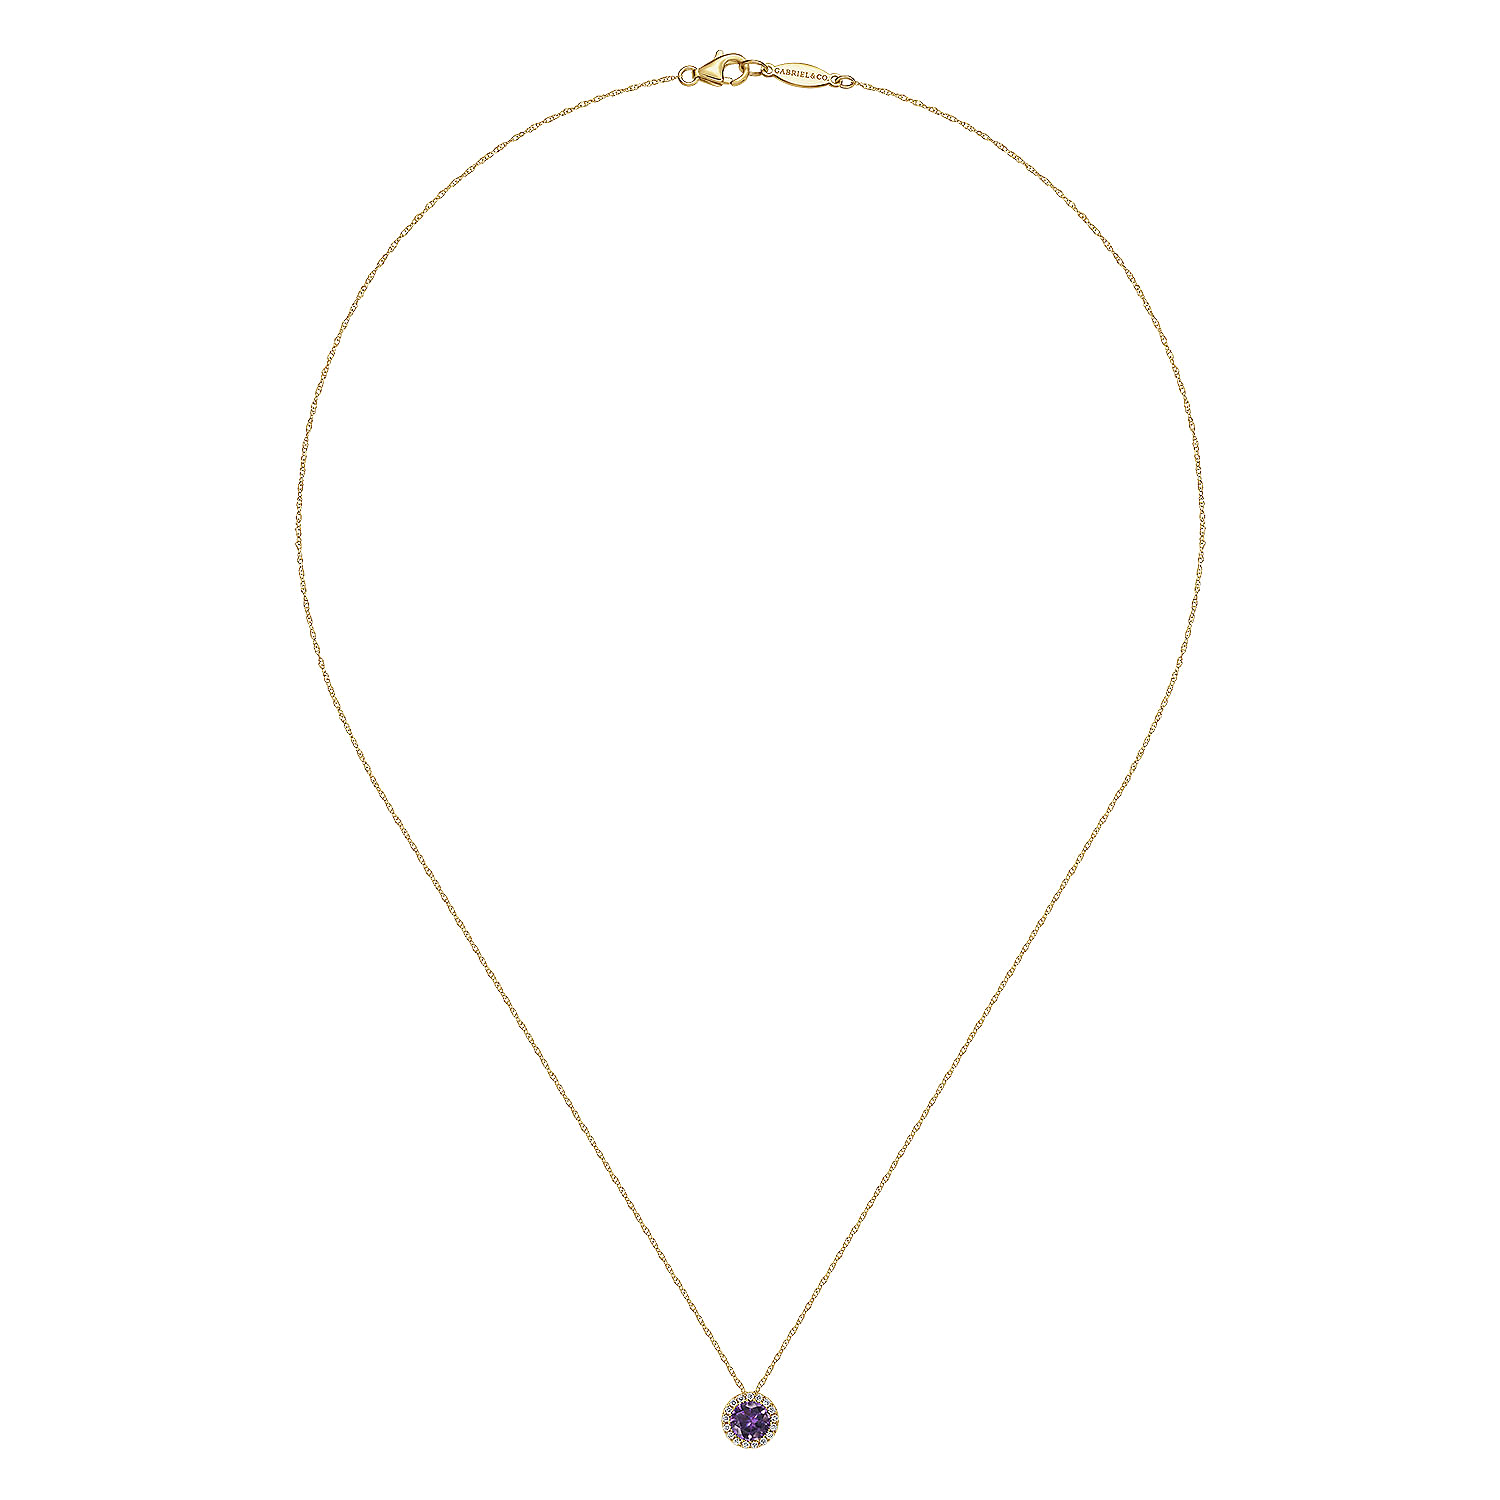 14K Yellow Gold Amethyst and Diamond Halo Pendant Necklace